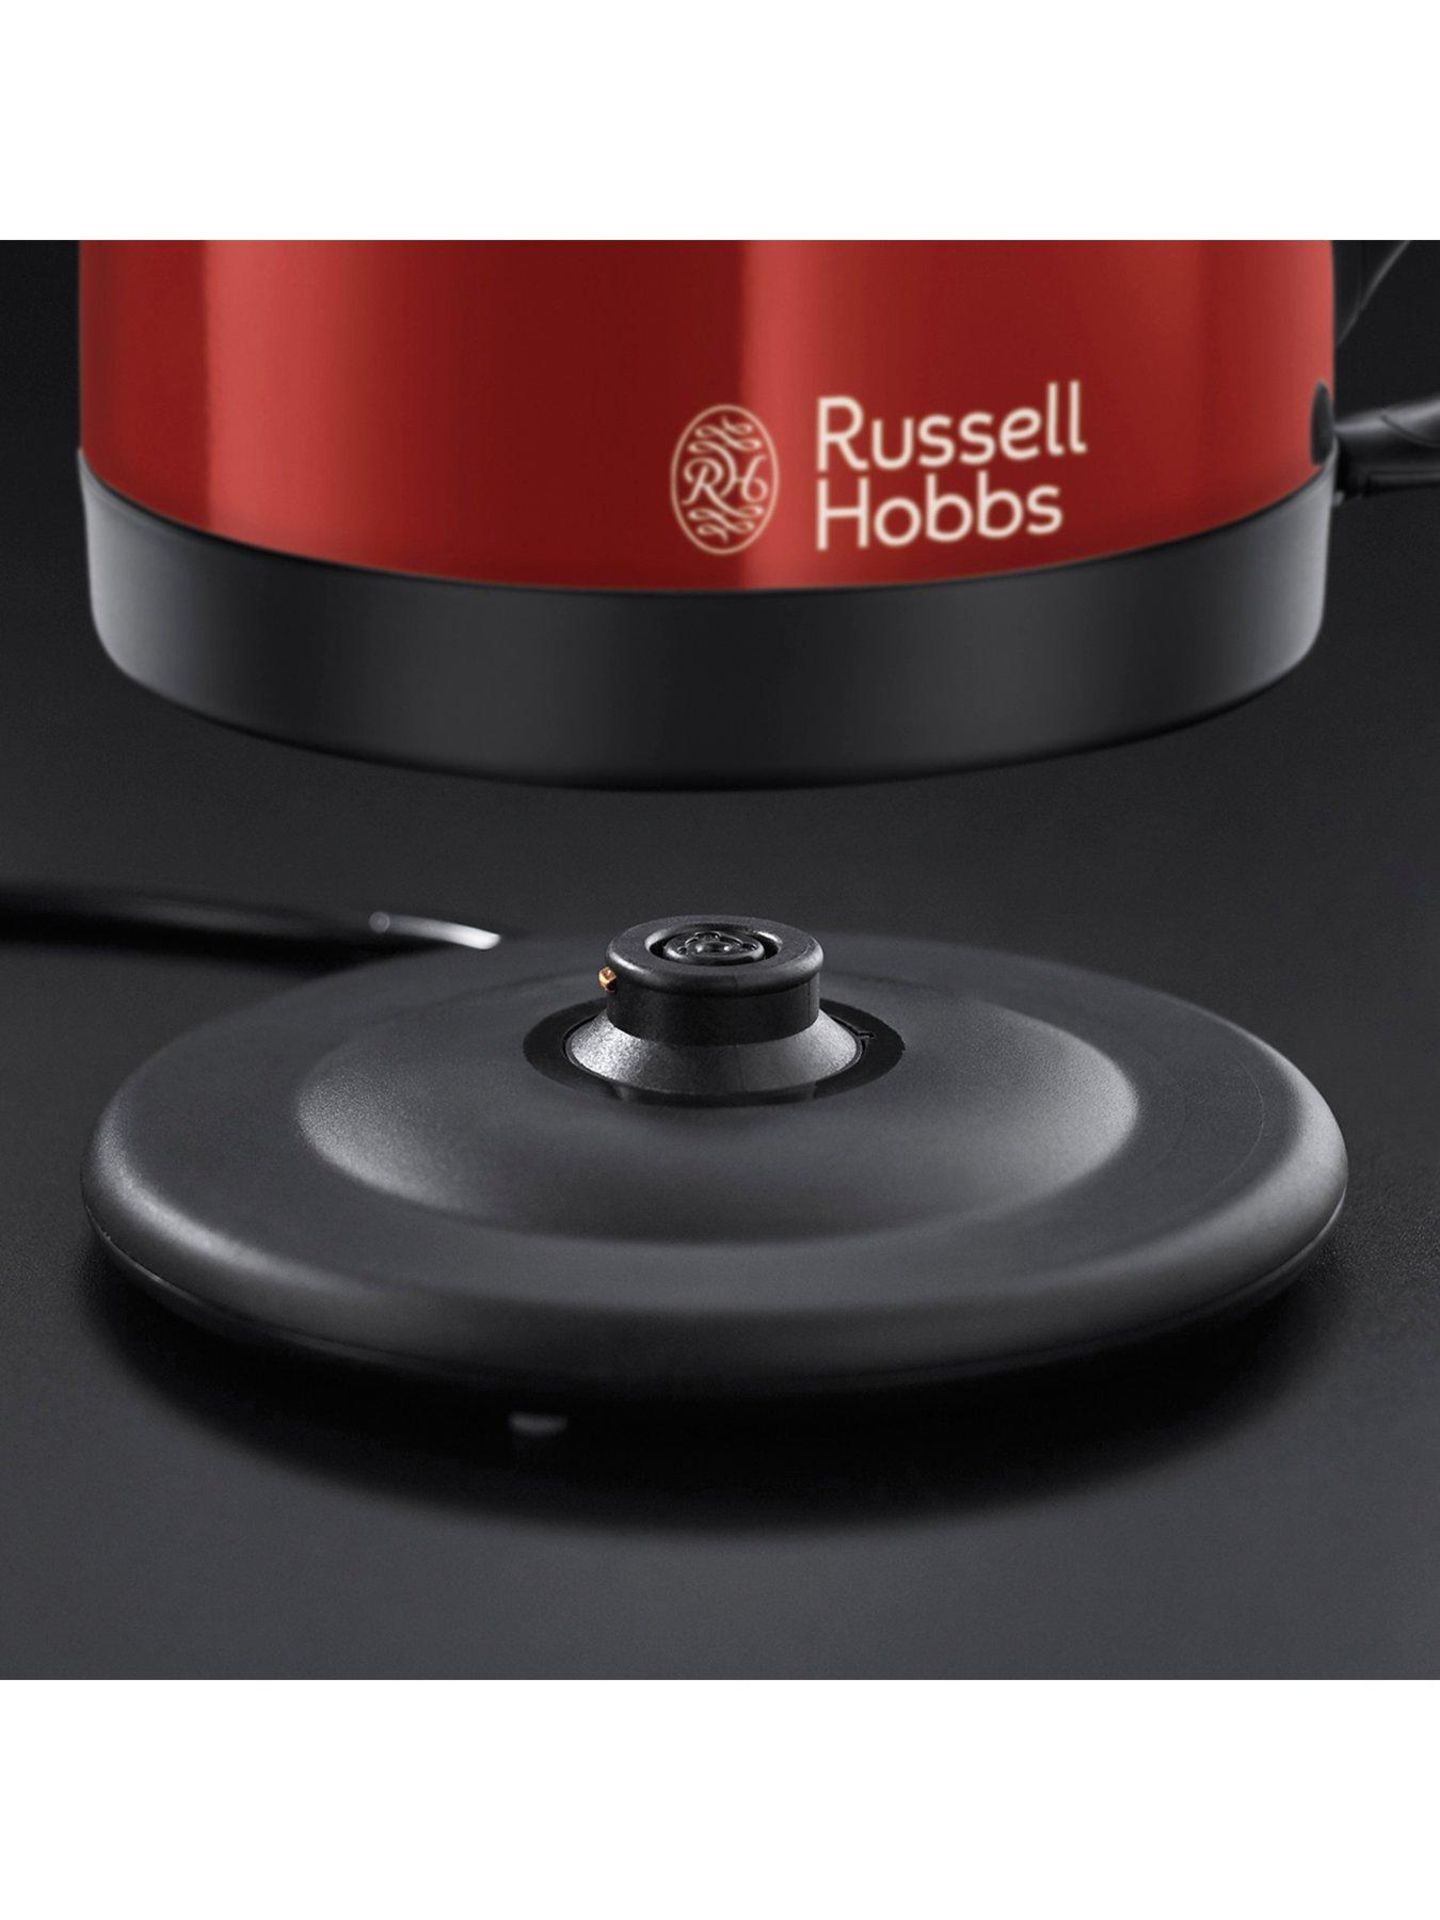 V Brand New Russel Hobbs Red Dorchester Kettle - Perfect Pour - Saves Up To 70% Energy - Littlewoods - Image 3 of 5